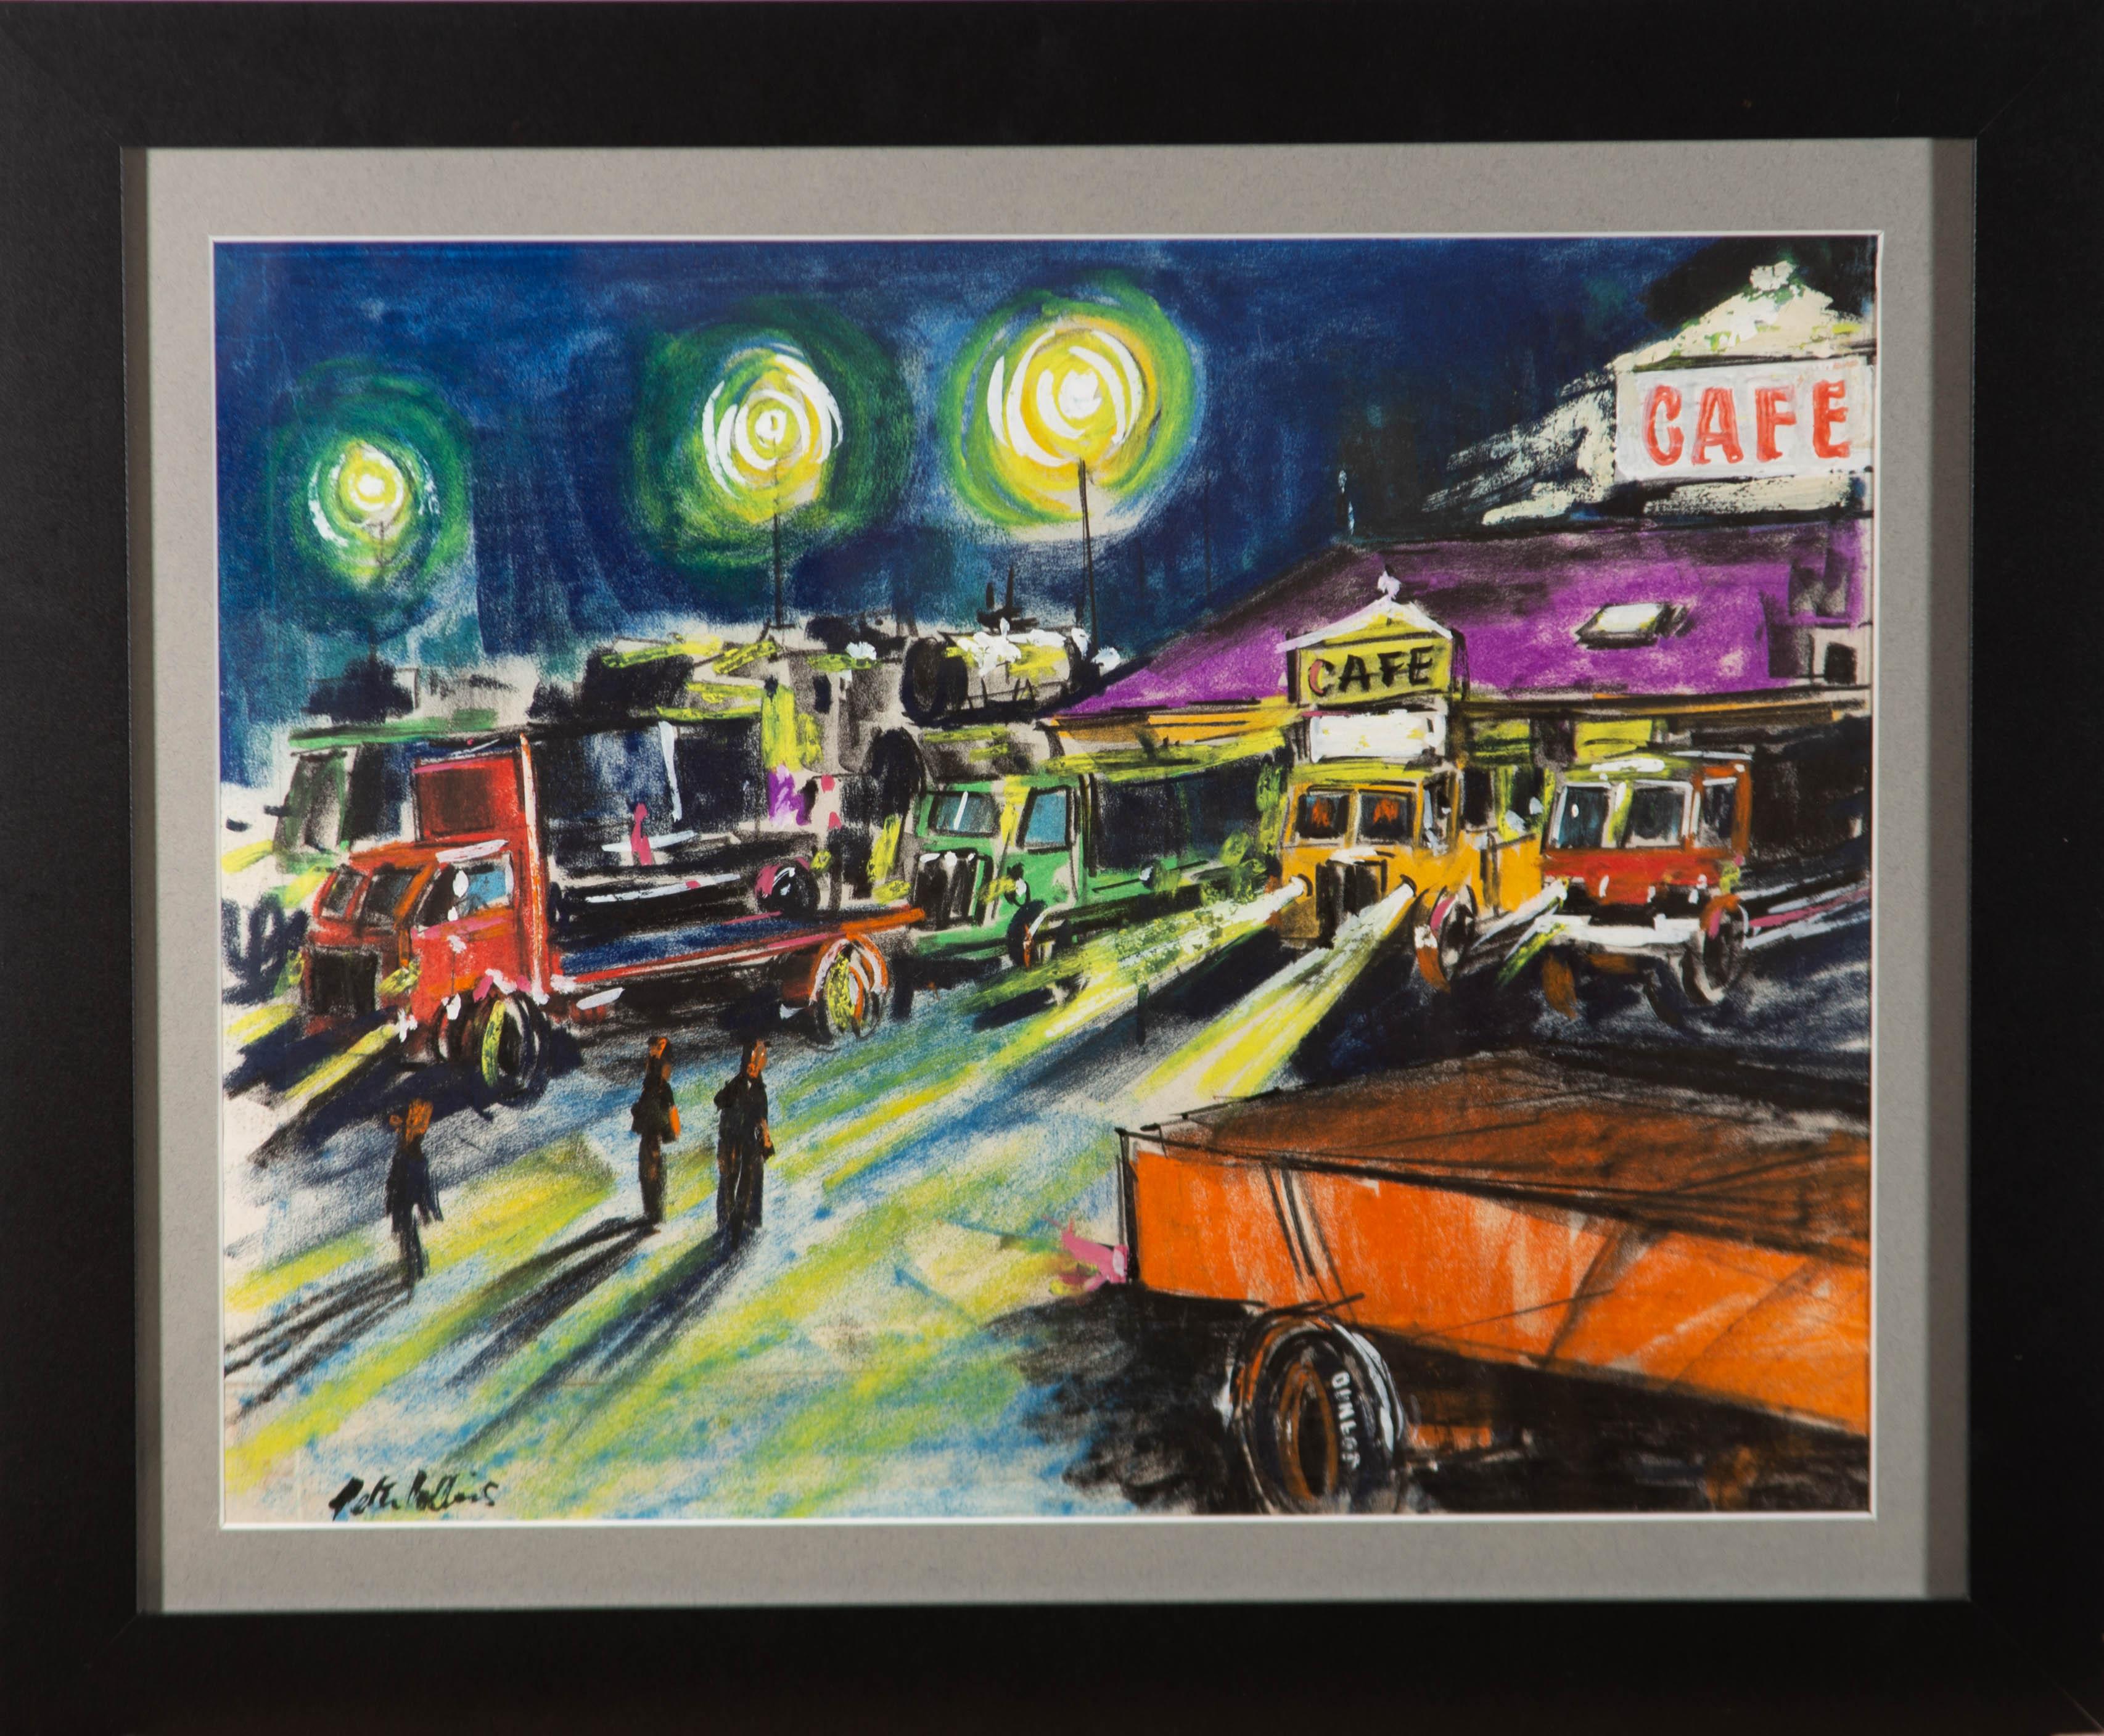 An engaging oil pastel painting with charcoal and gouache by the British artist Peter Collins. The scene depicts a night view of several parked lorries by a cafe with figures. In loose strokes and a vibrant colour palette, the artist was able to